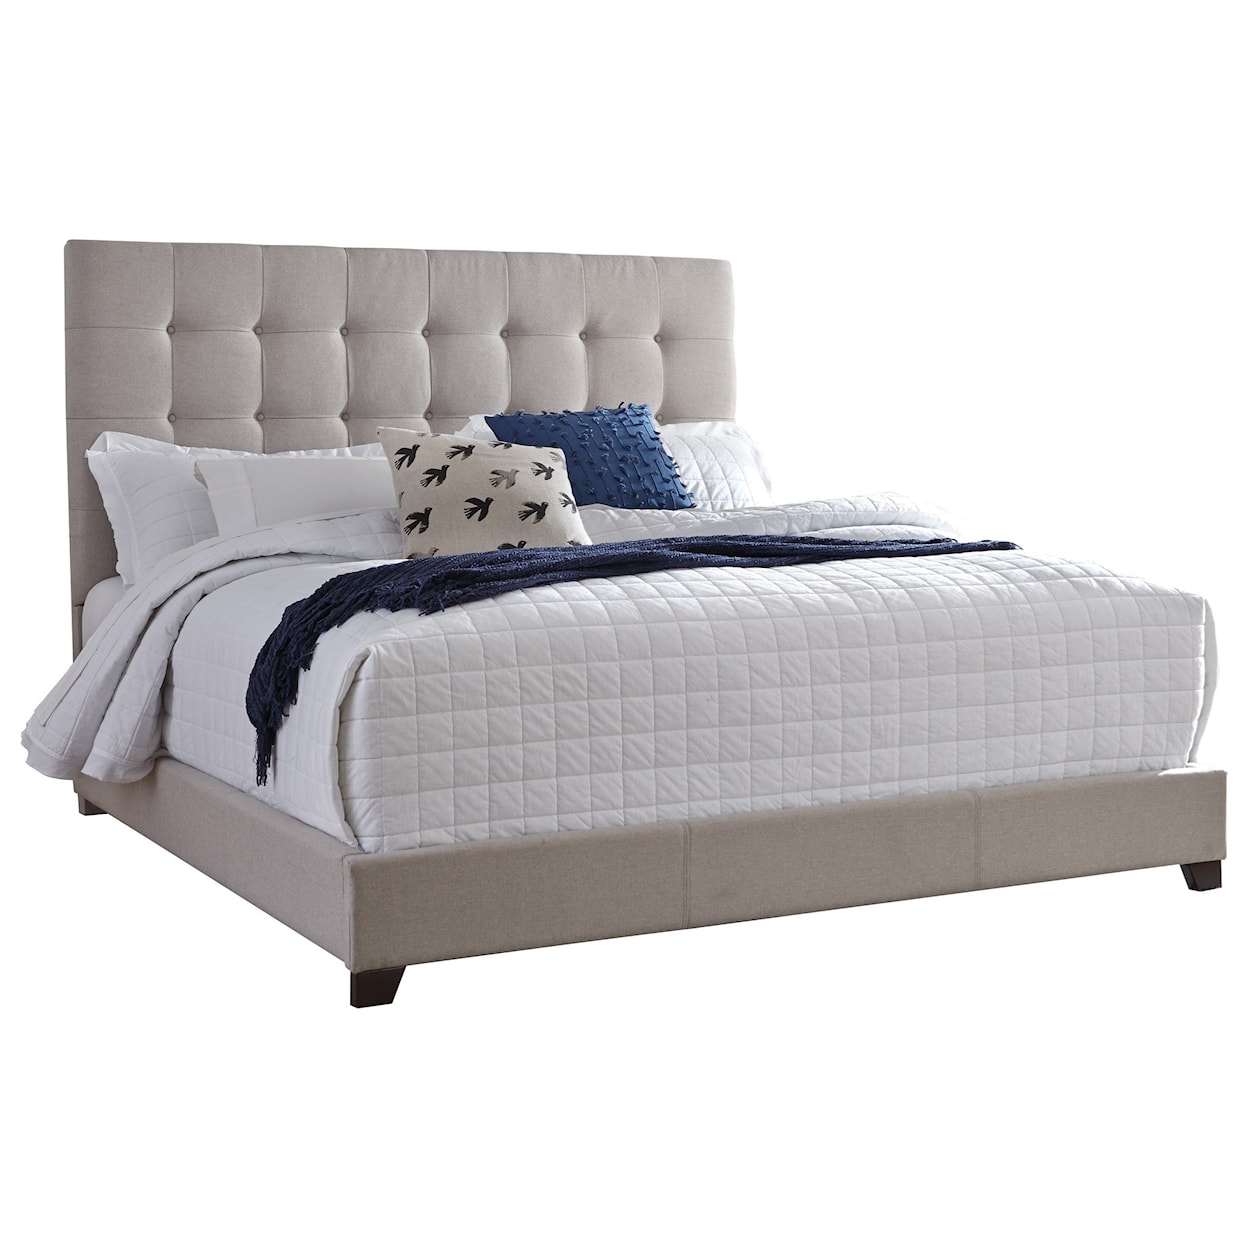 Signature Design by Ashley Dolante King Bed